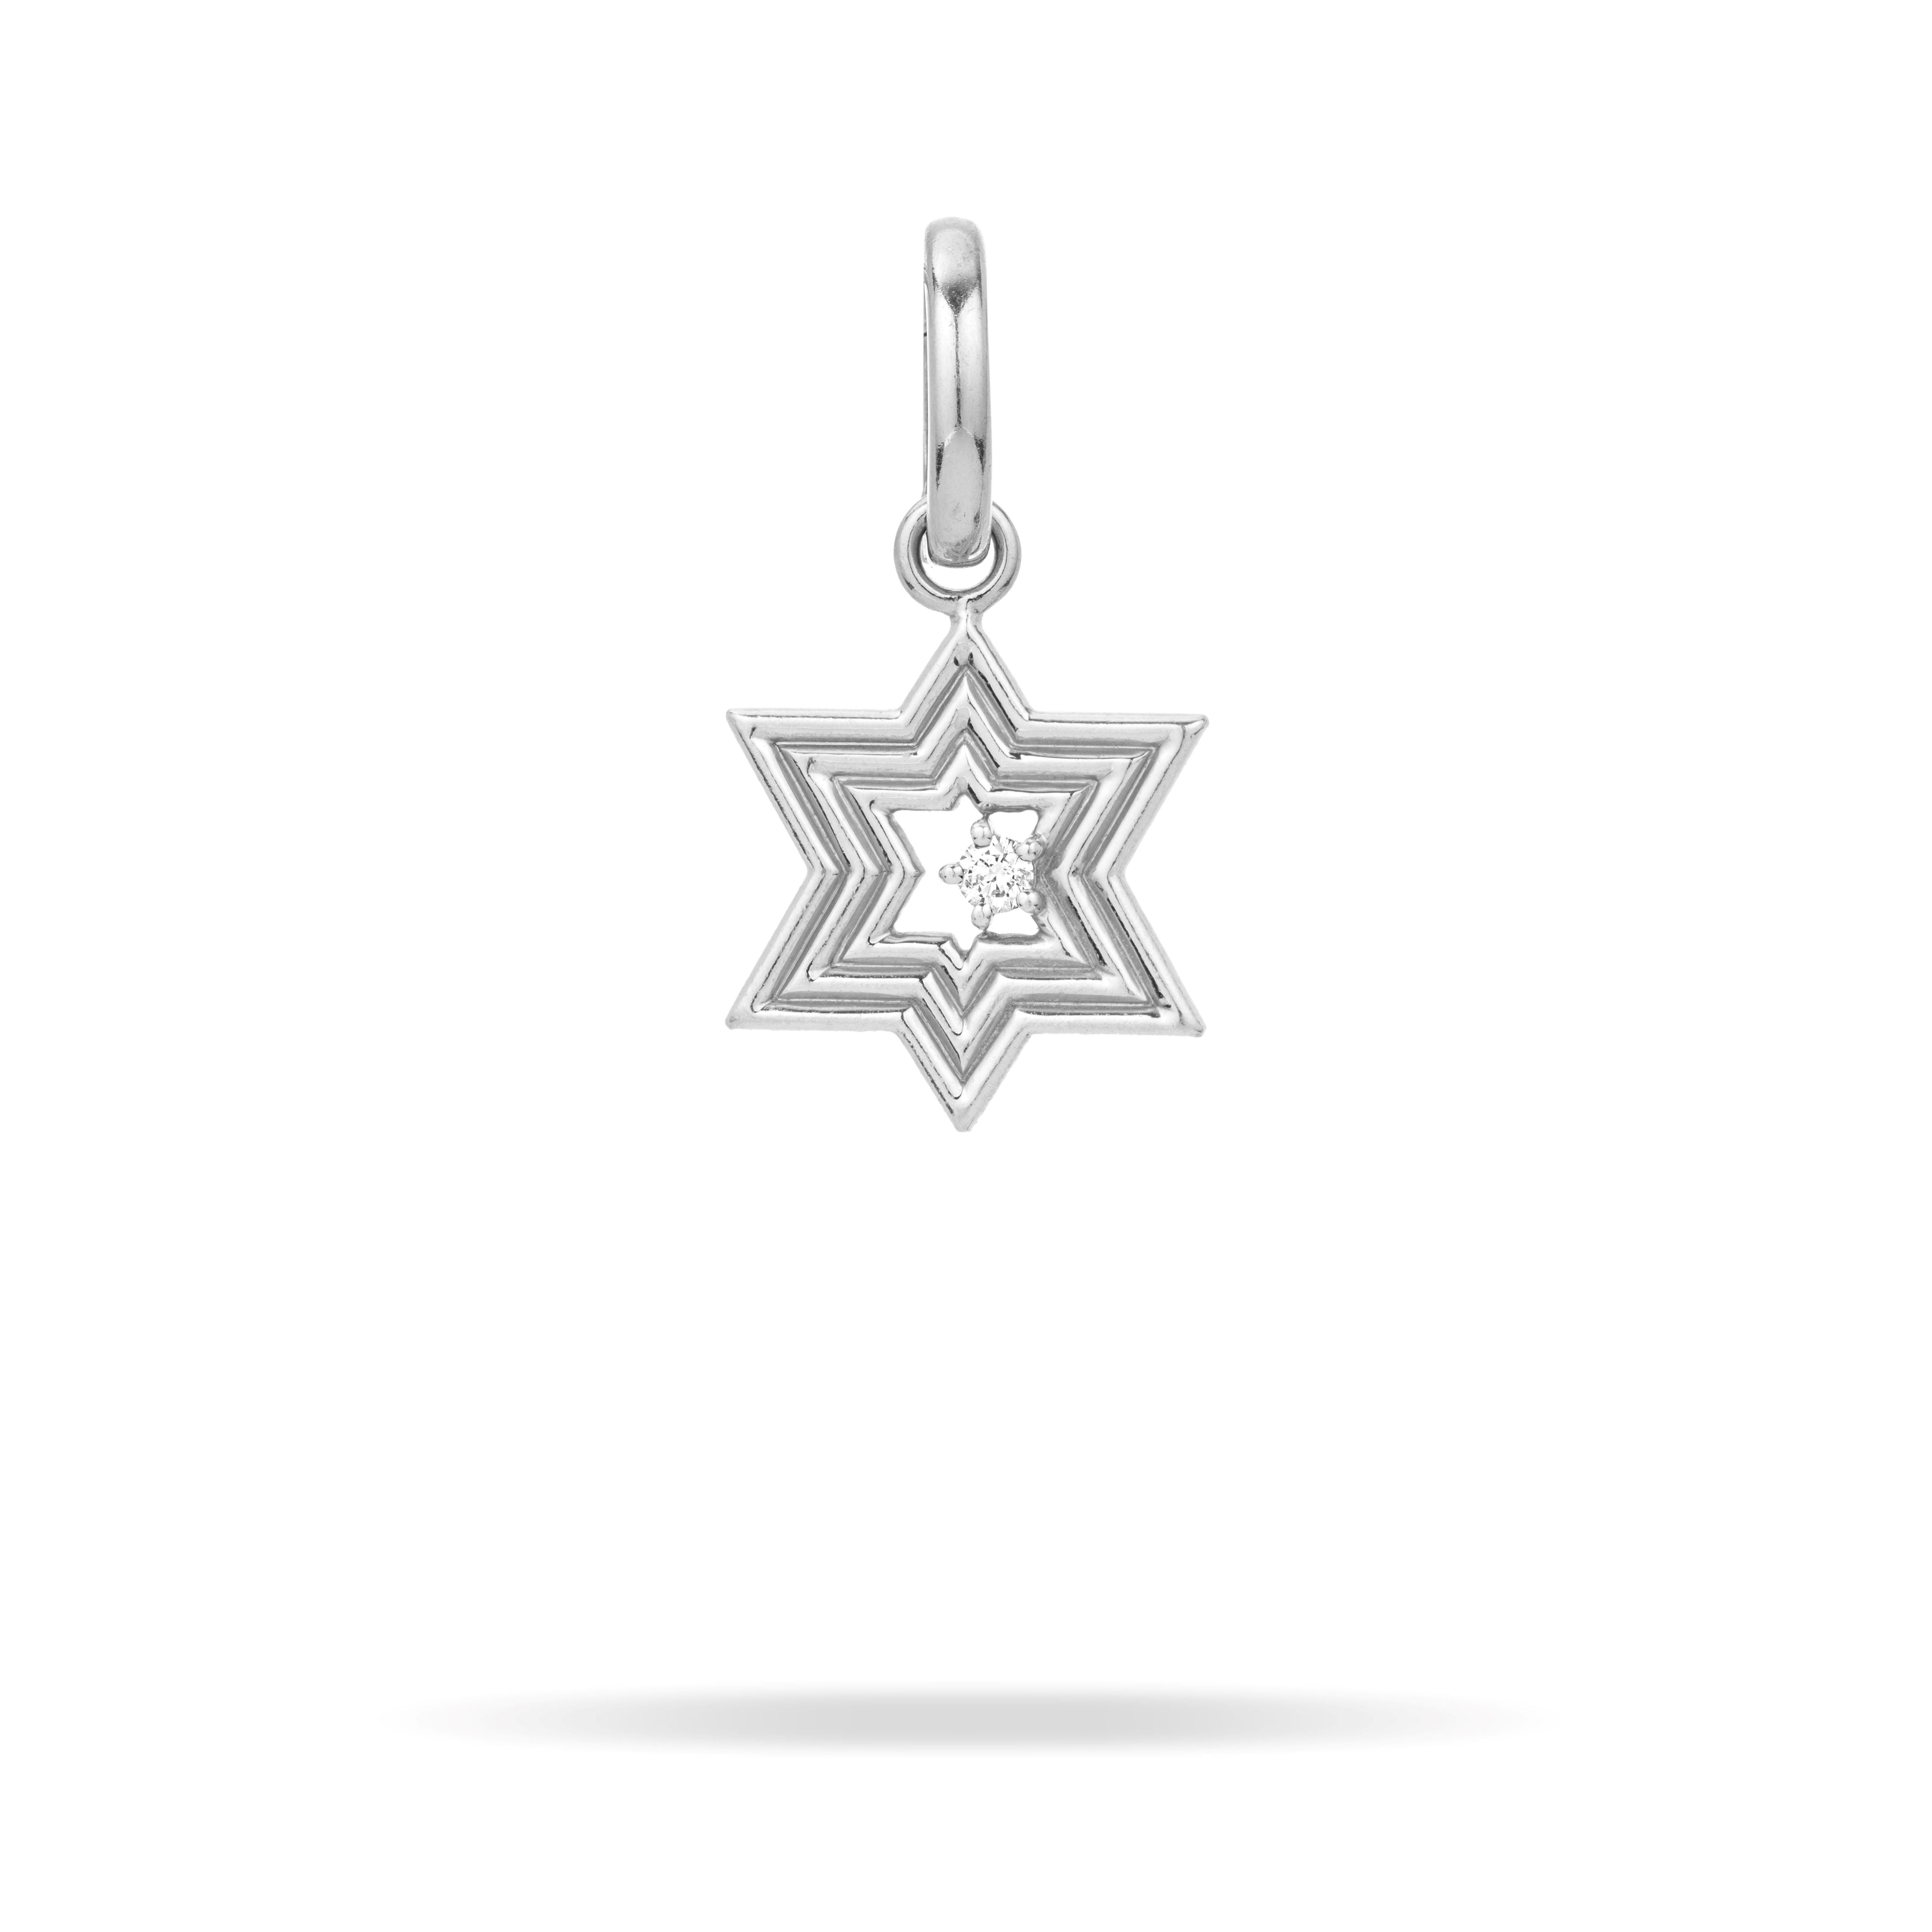 Groovy Star of David Hinged Charm in Sterling Silver